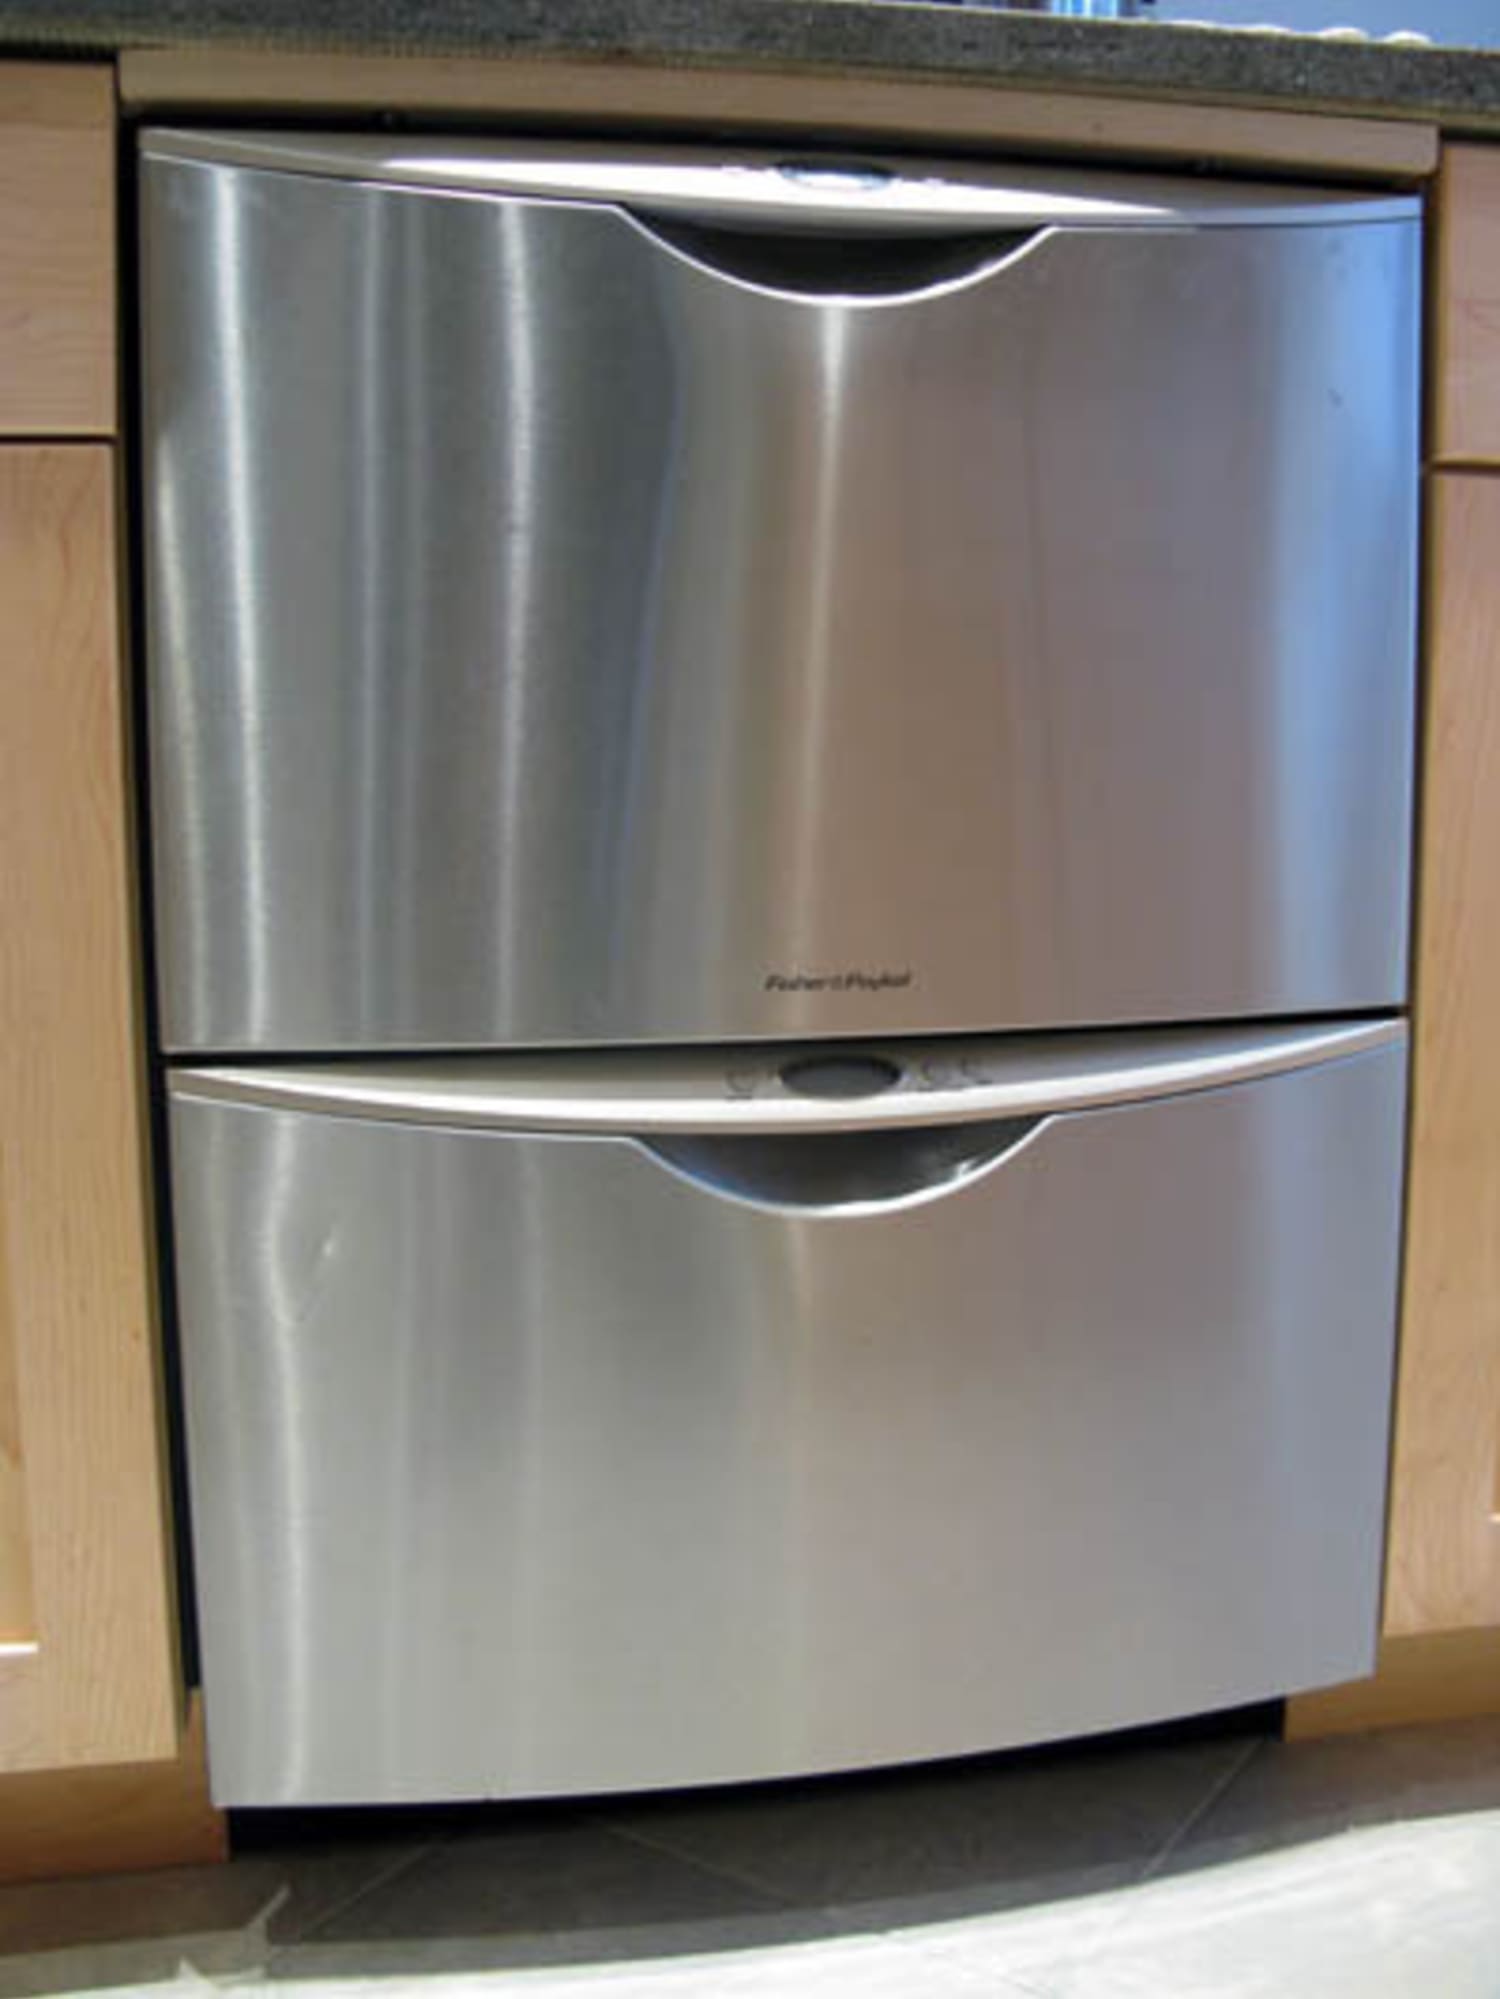 fisher paykel dishwasher reviews double drawer